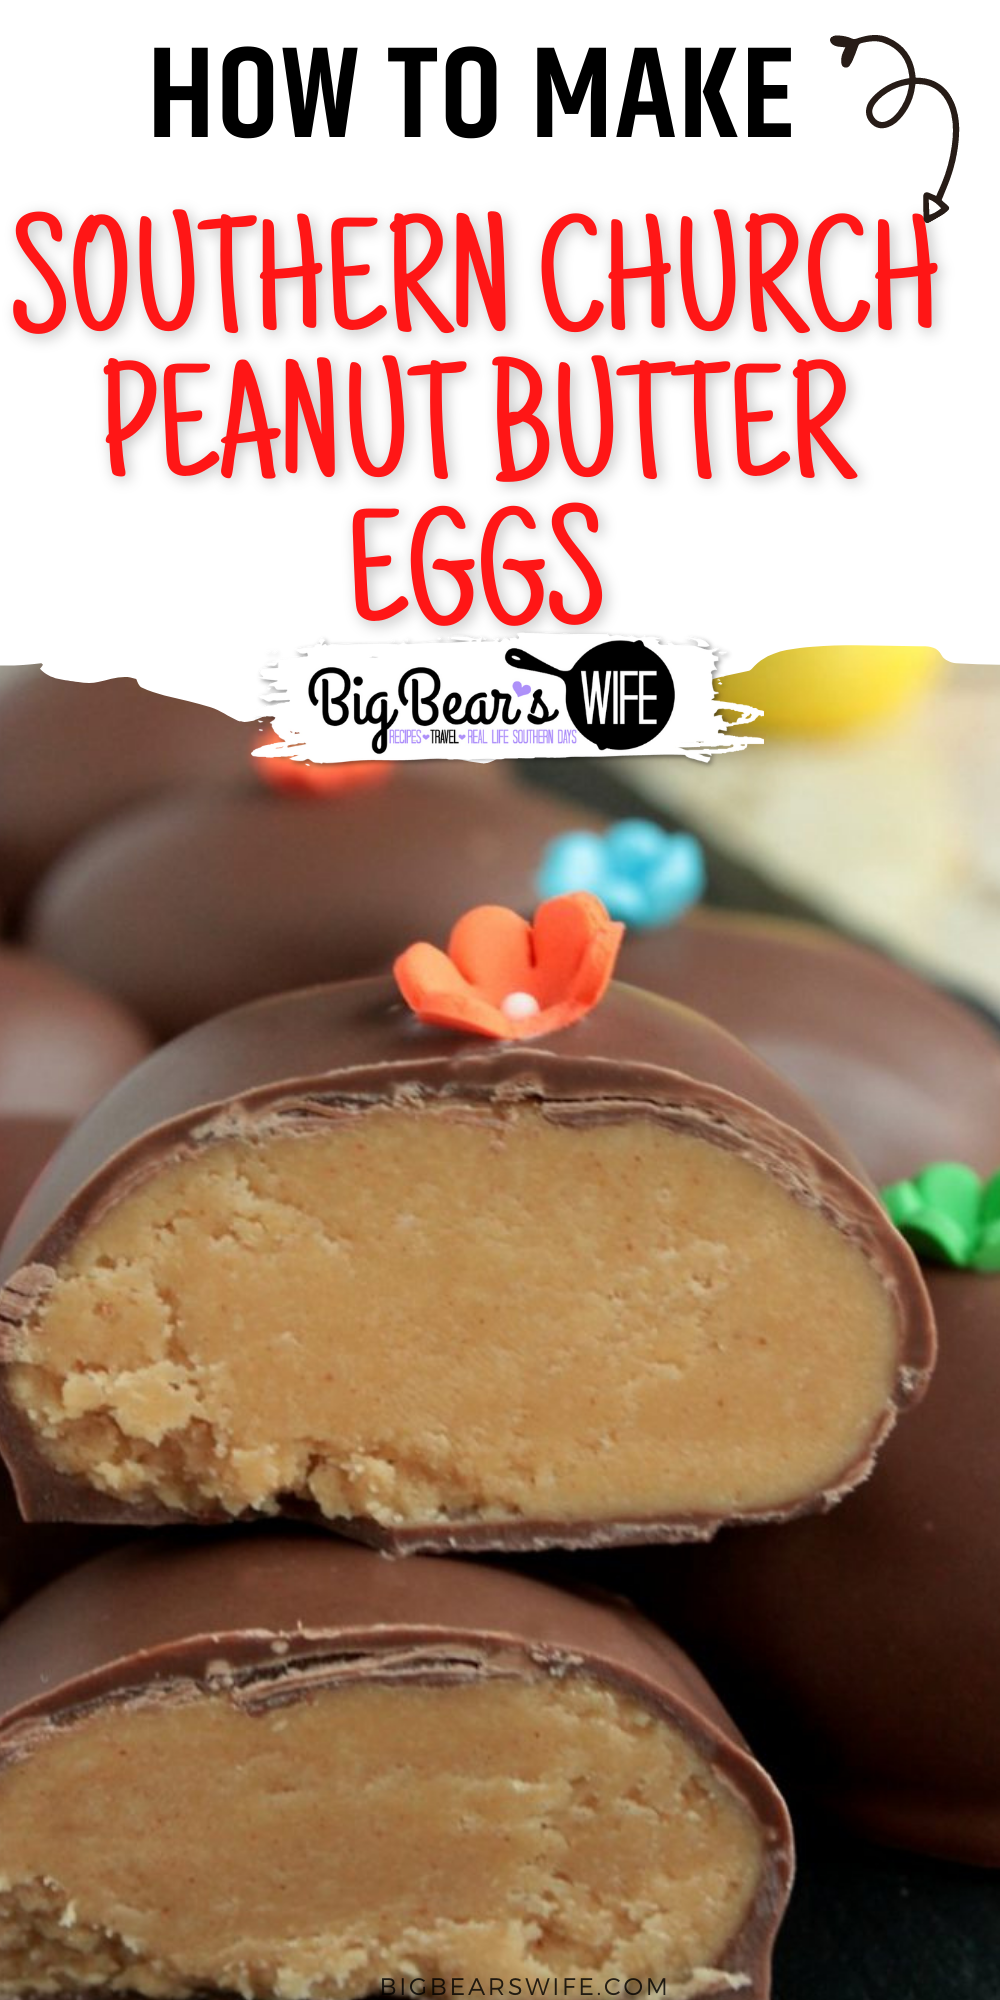 Love the Chocolate Peanut Butter Eggs that churches make around Easter time? These Southern Church Peanut Butter Eggs are just like those, they’re perfect and taste amazing!

 via @bigbearswife